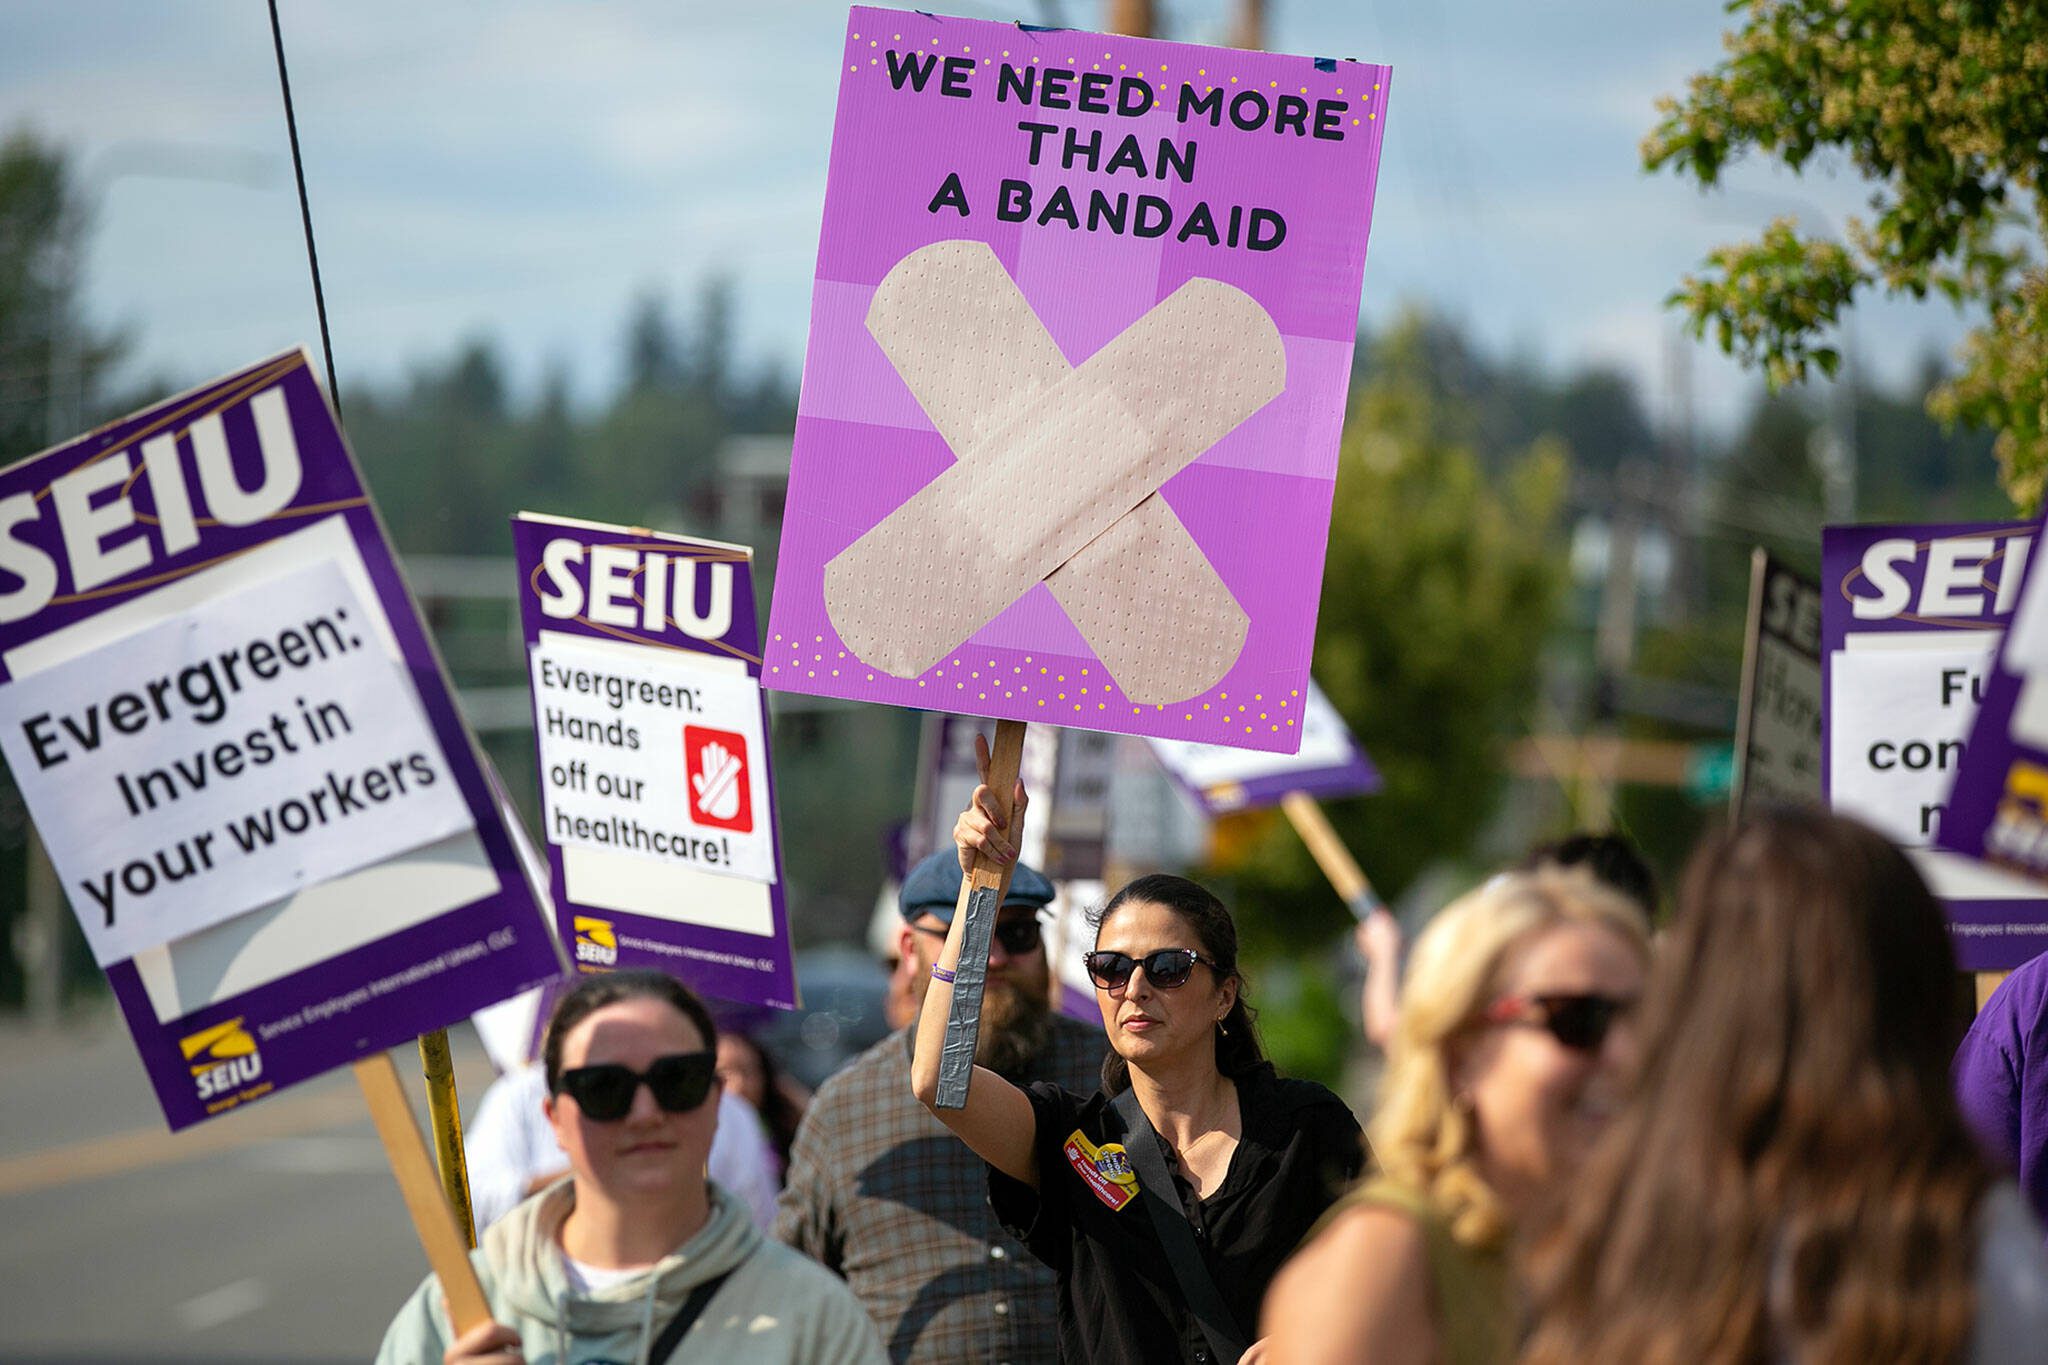 Emergency Room Technician Renee Uribe joins the picket line with a custom poster during a union protest in front of EvergreenHealth Monroe on Wednesday, May 24, 2023, in Monroe, Washington. (Ryan Berry / The Herald)